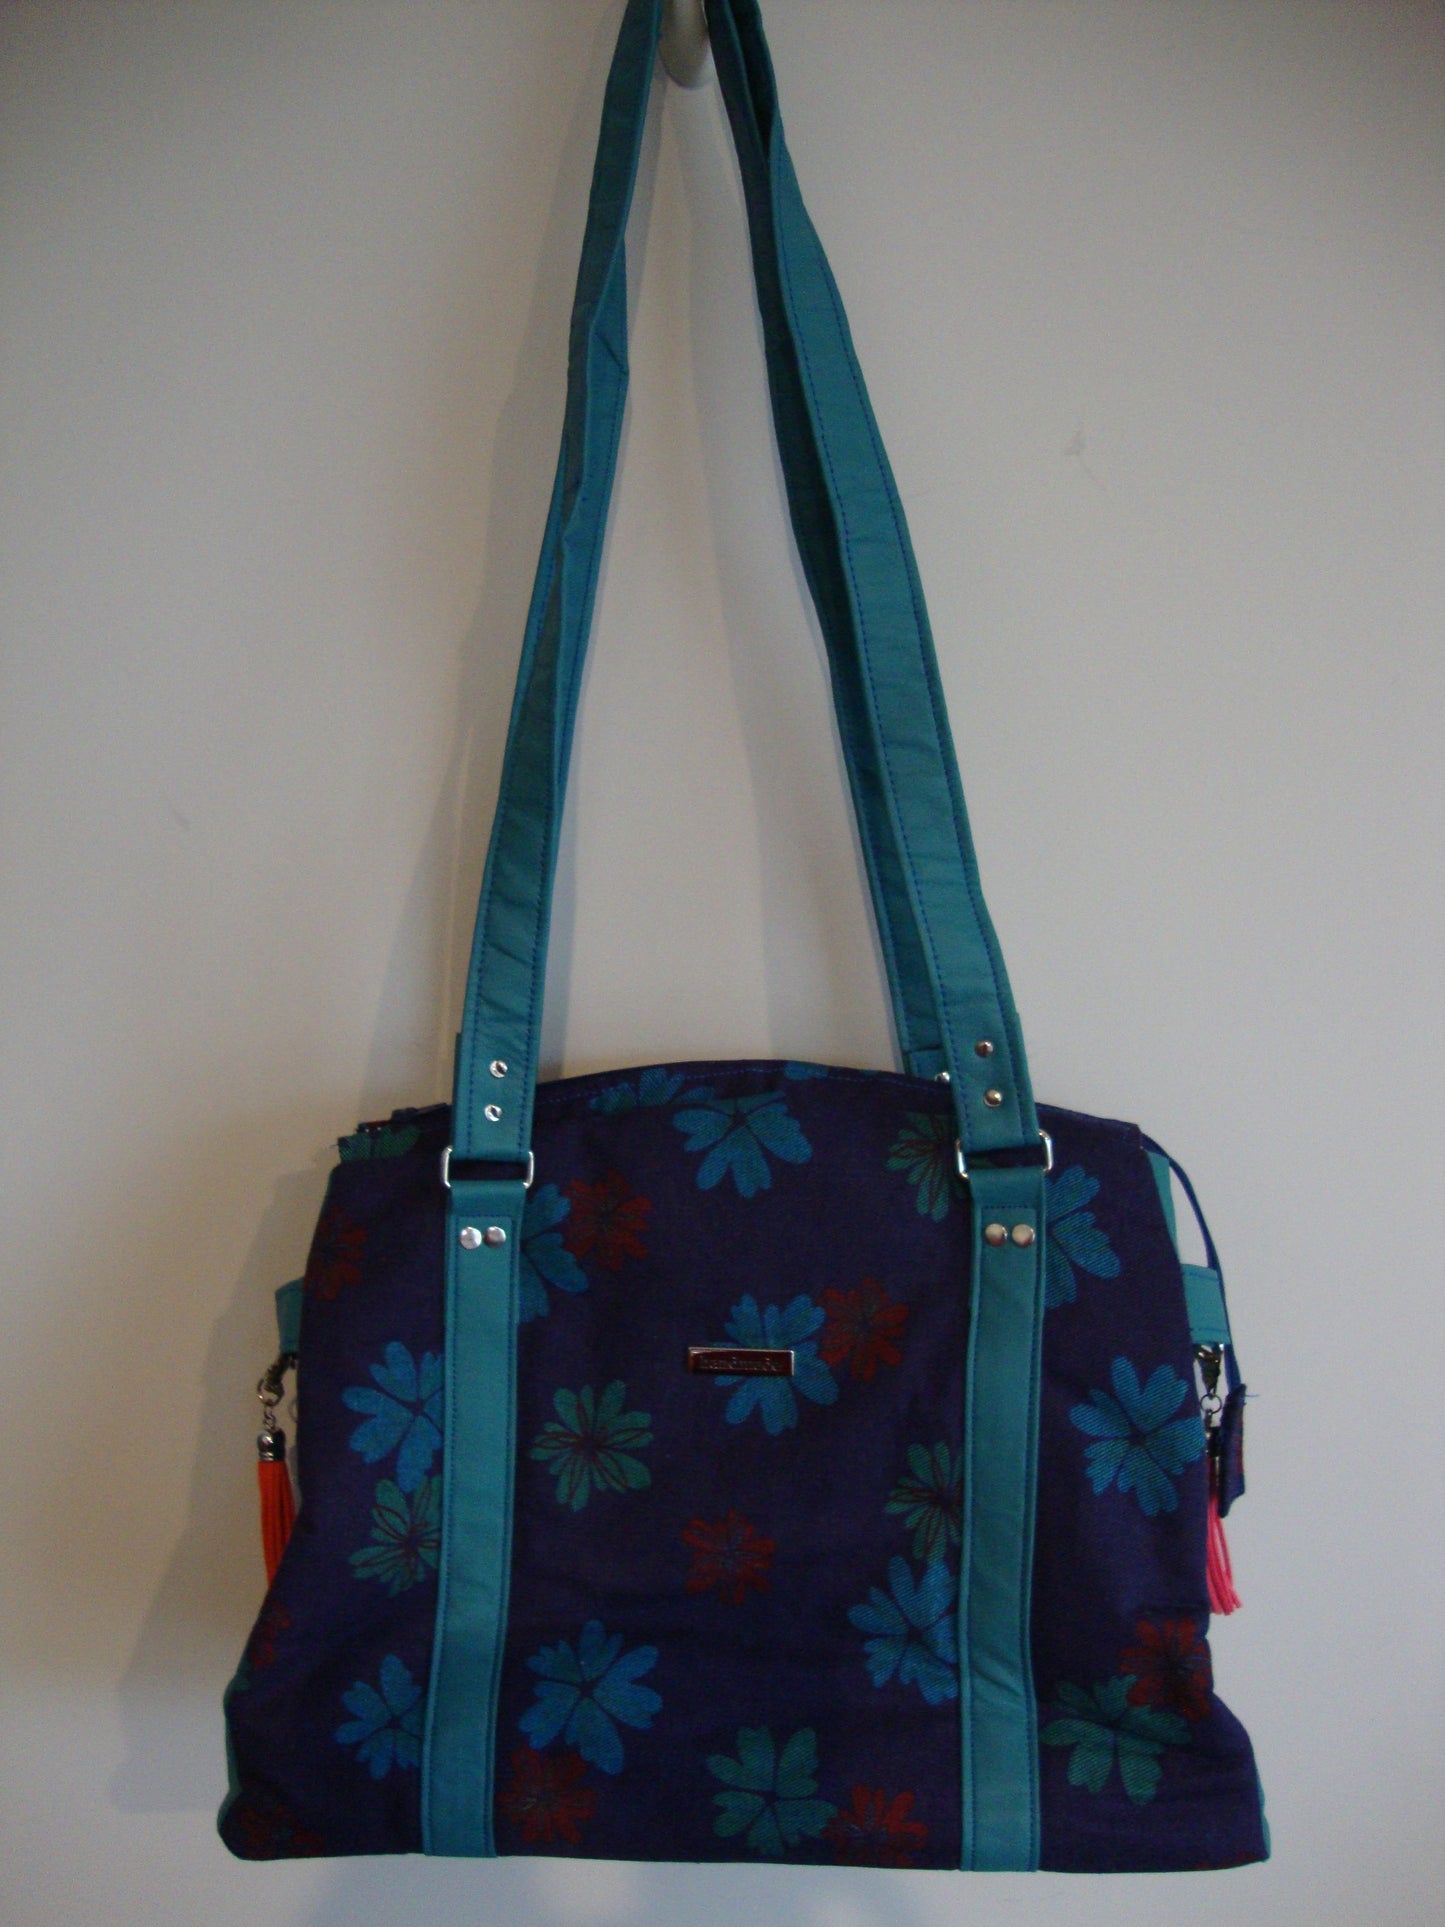 Denim Flower with Turquoise Vinyl Tote Bag